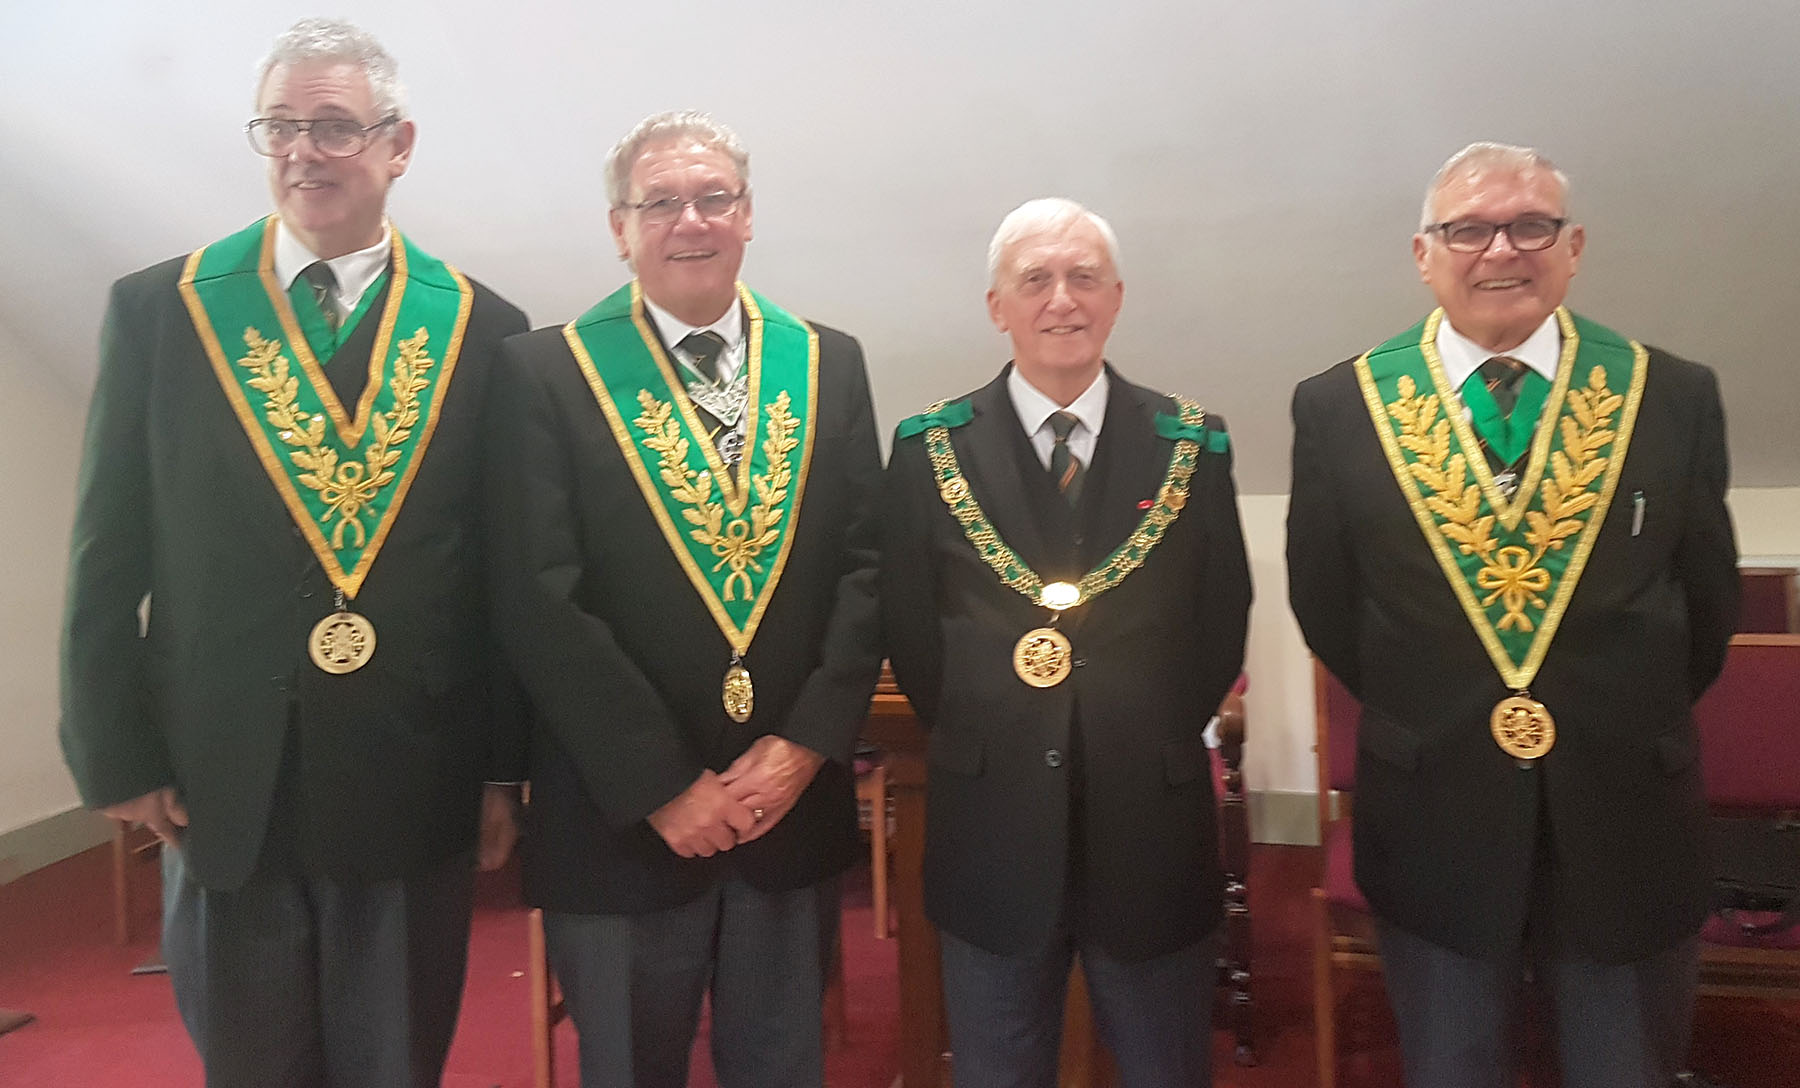 Contingent from Kent visit the District of Thames Valley for their Annual Meeting